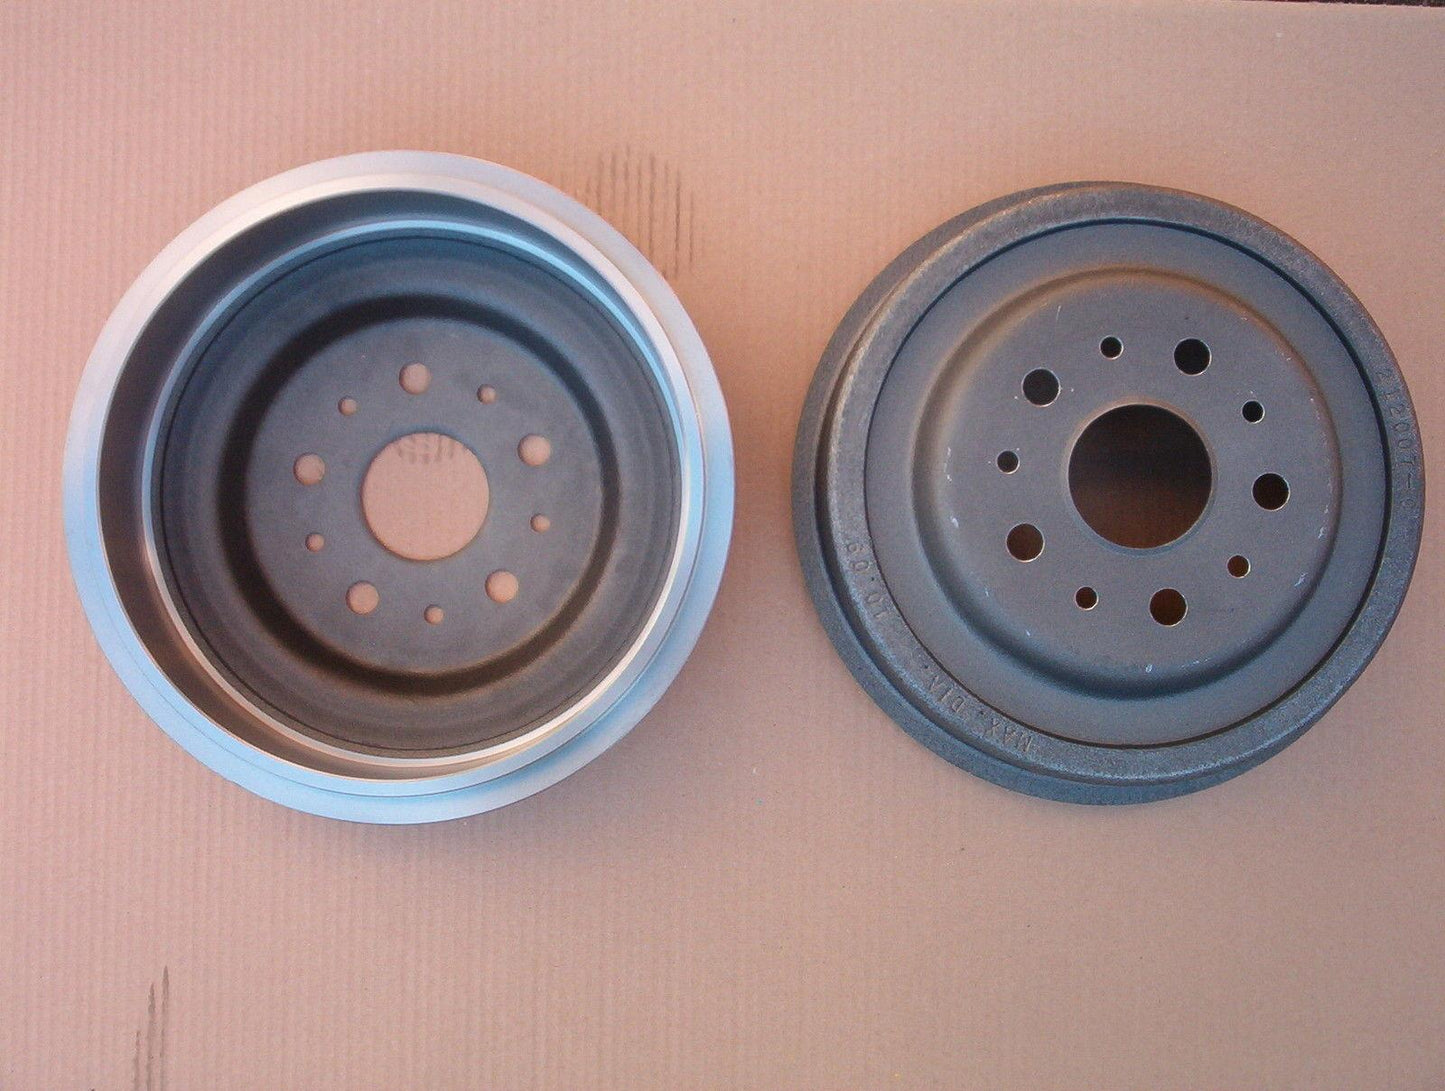 Brake Drum Dodge Dart Plymouth Valiant Barracuda Duster  Scamp REAR 2 drums